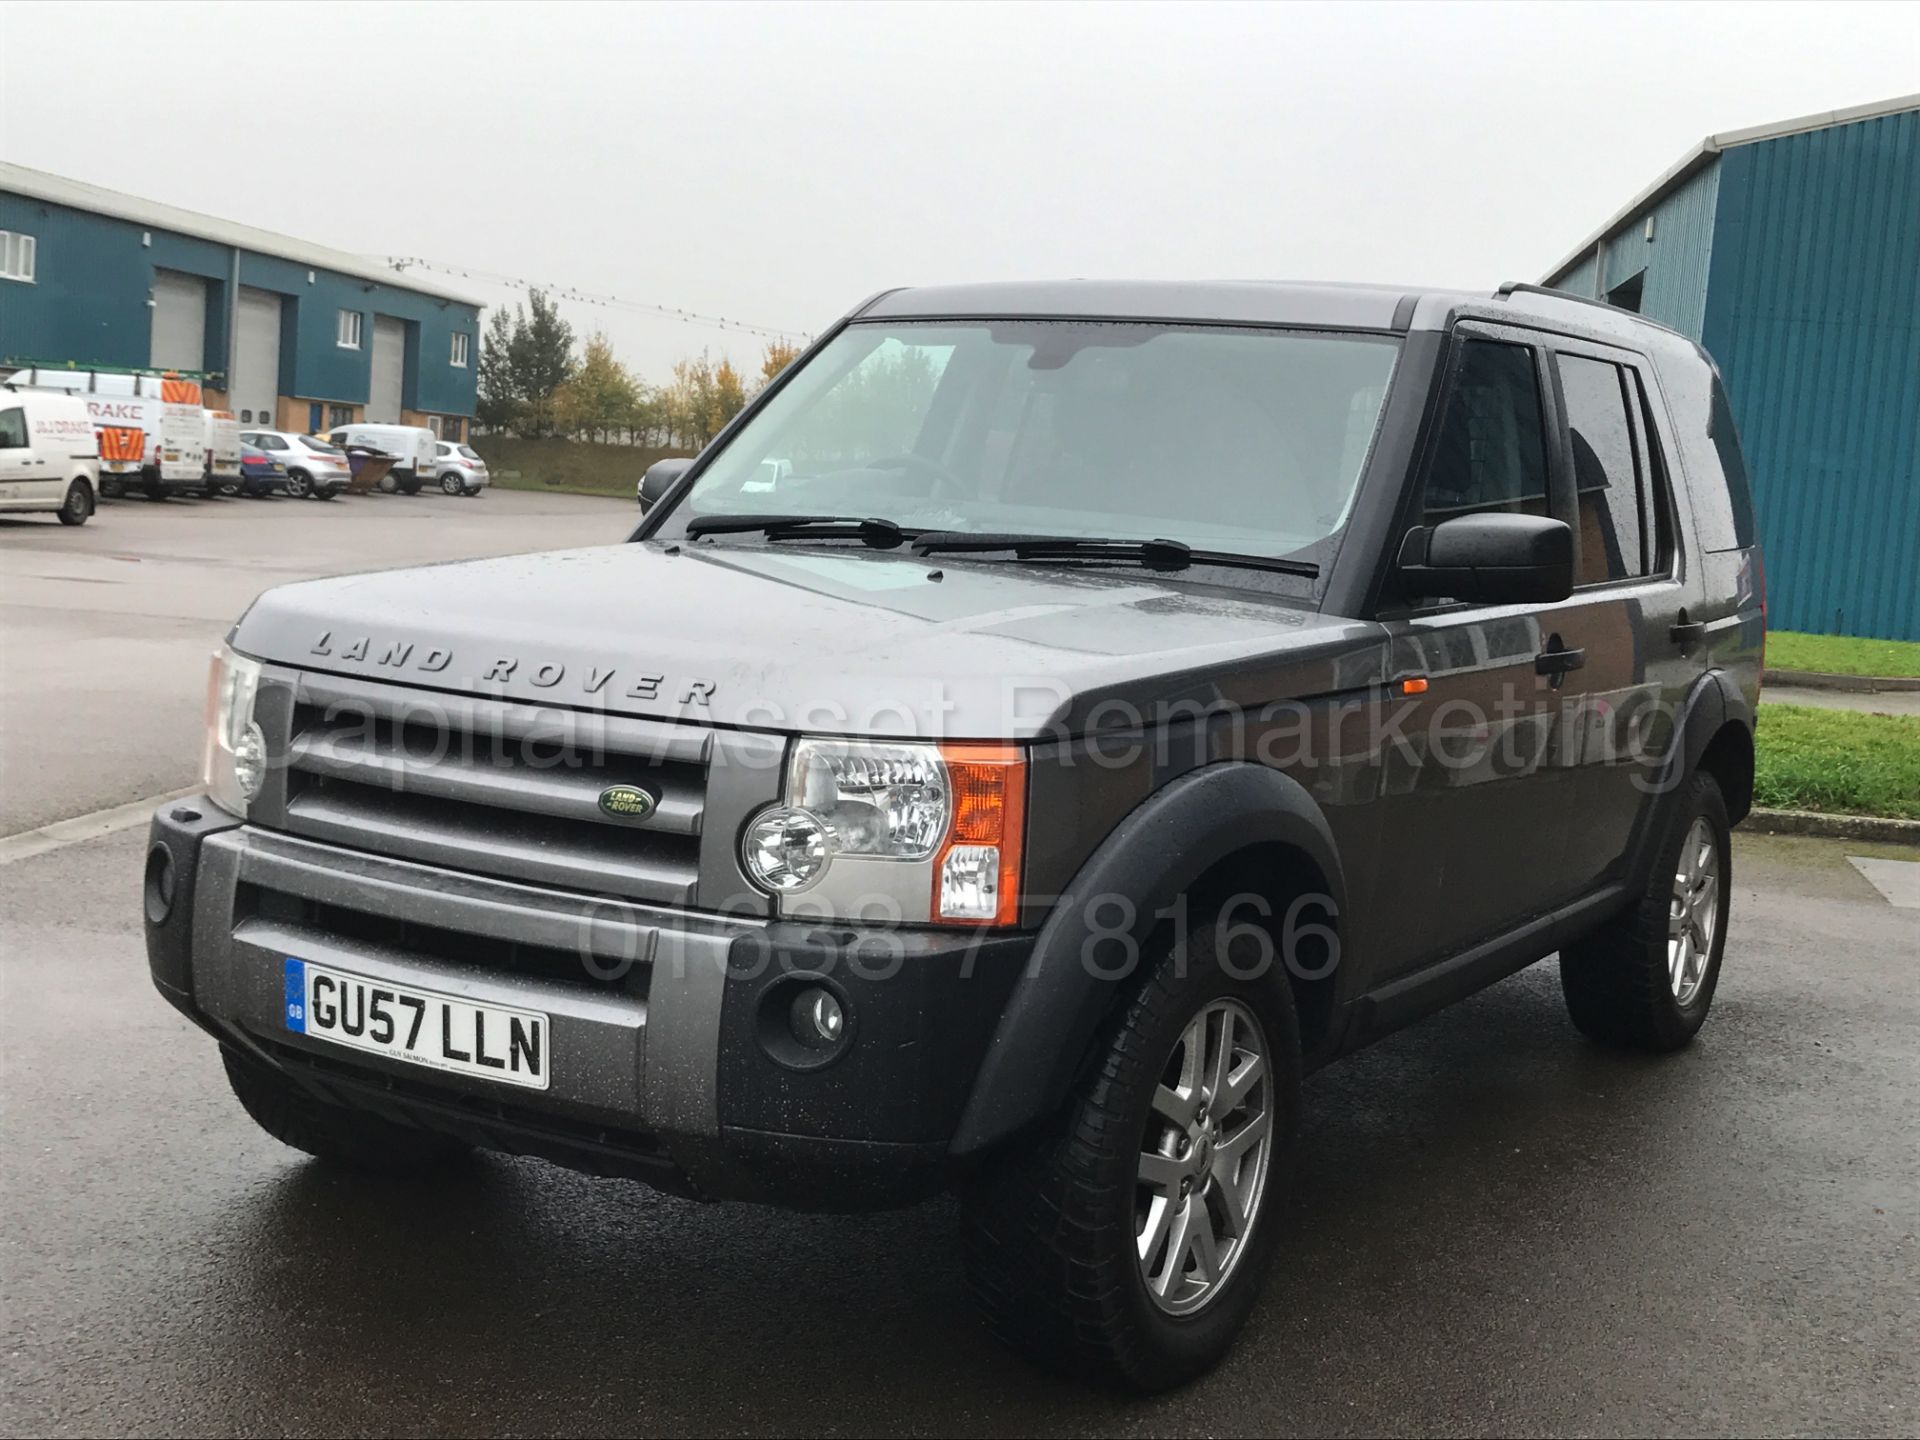 (On Sale) LAND ROVER DISCOVERY 3 XS 'COMMERCIAL' (2008 MODEL) 'TDV6 - 190 BHP - AUTO' - Image 4 of 30